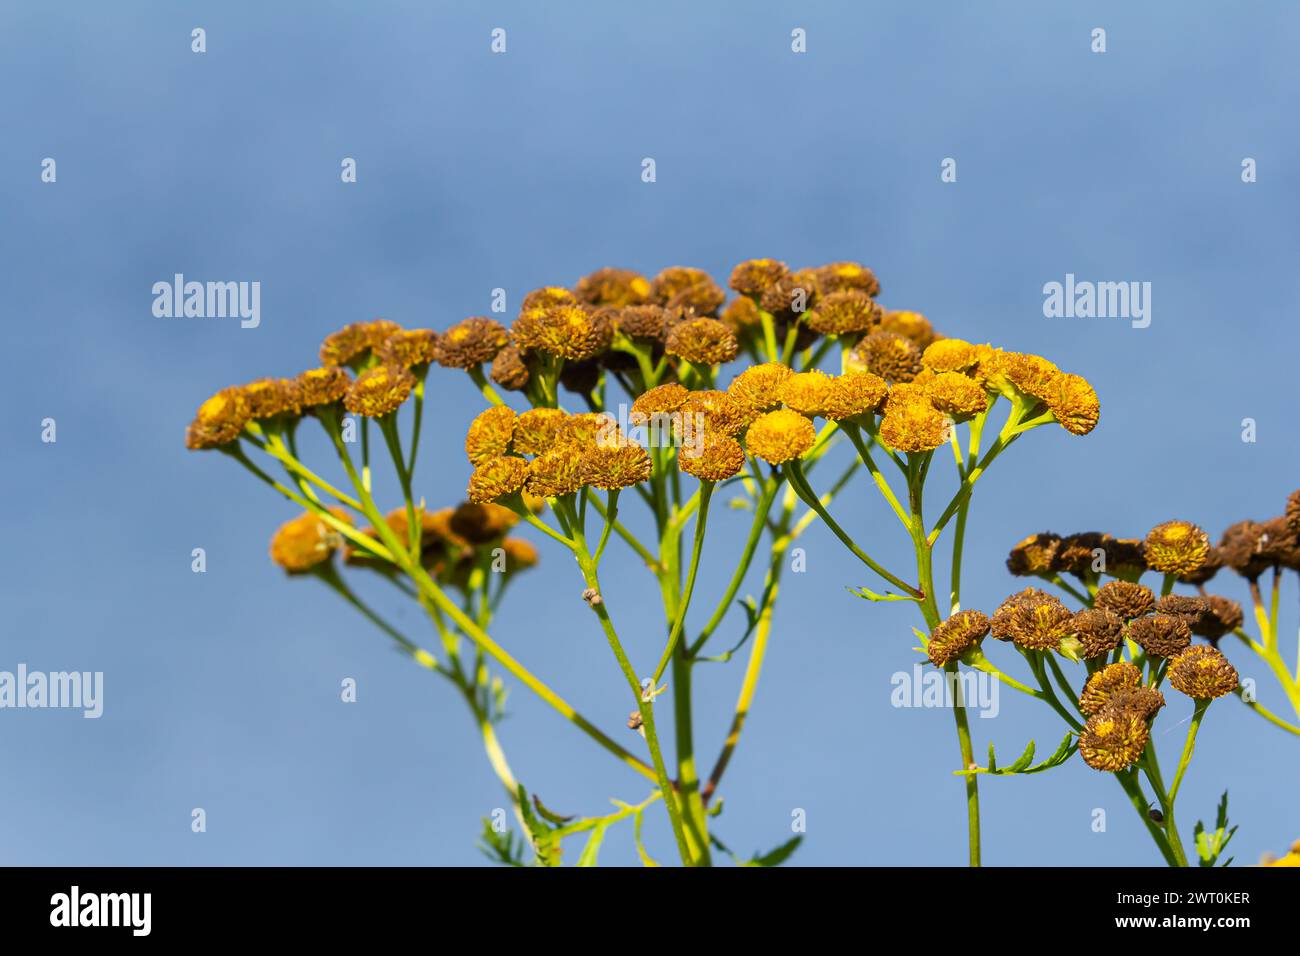 Tansy is a perennial herbaceous flowering plant used in folk medicine. Stock Photo